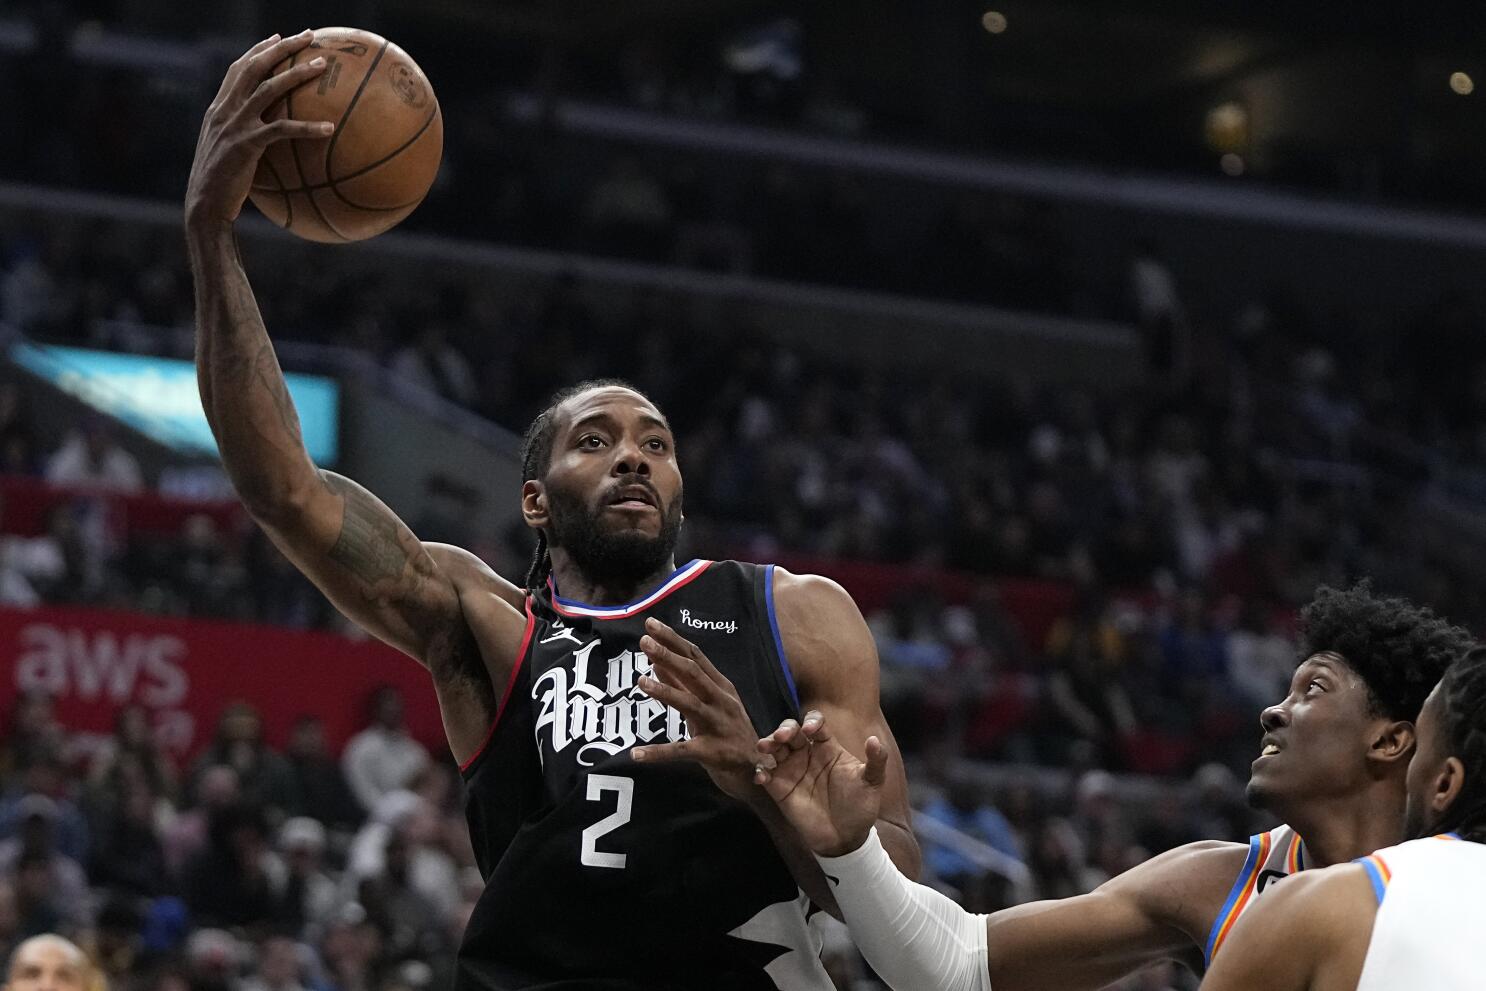 Star forward Kawhi Leonard re-signing with Los Angeles Clippers, NBA News